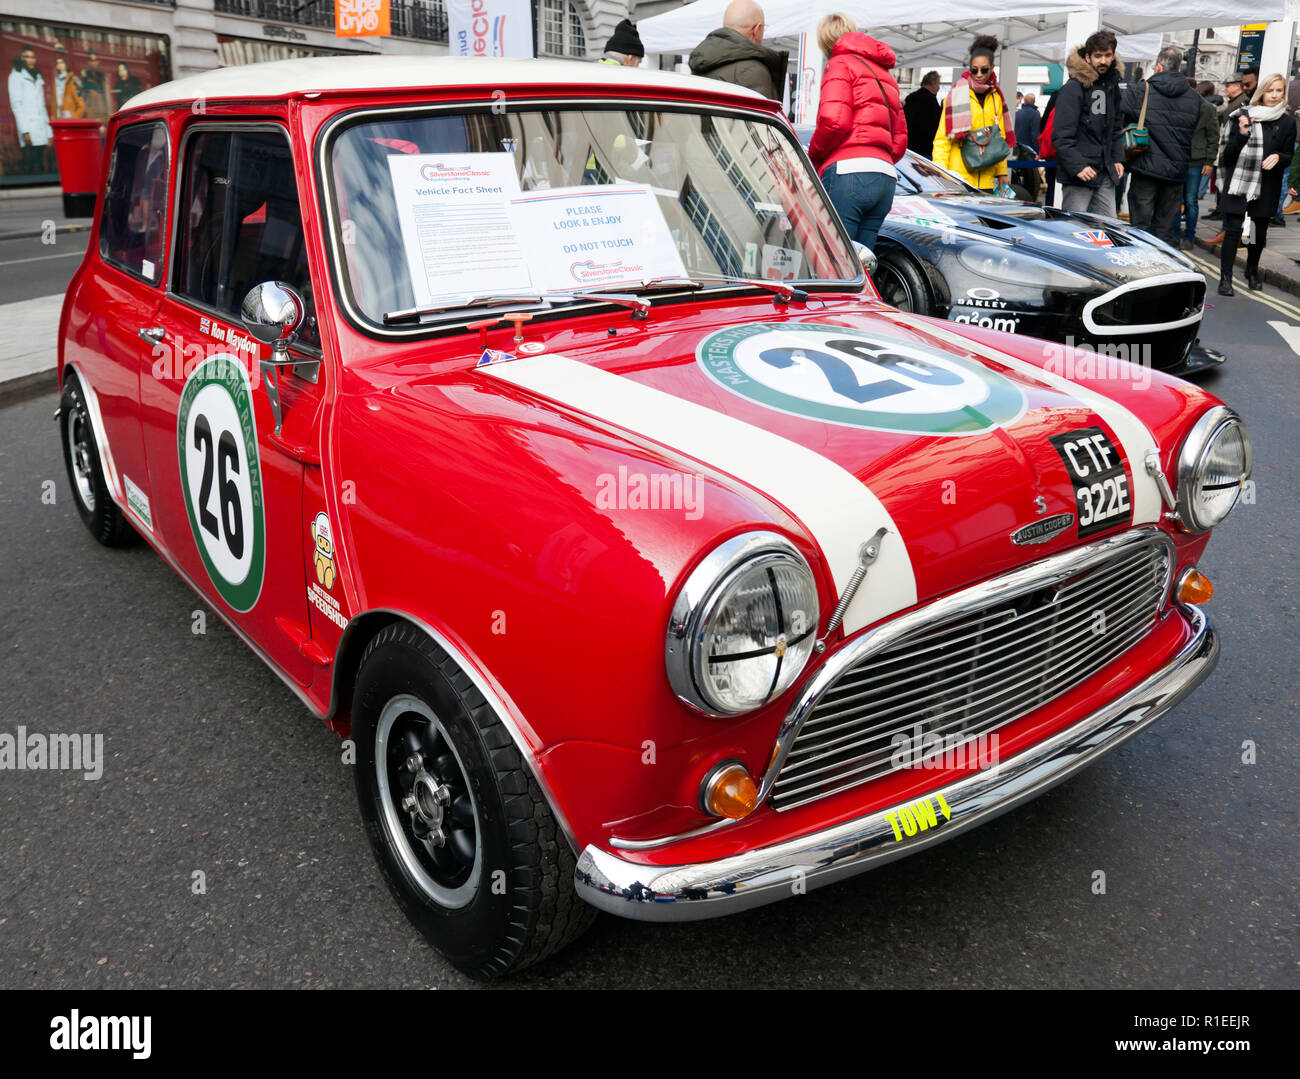 Three-quarter front view of Ron Maydons, 1965 Austin Mini Cooper S, on display at the Regents Street Motor Show 2018 Stock Photo